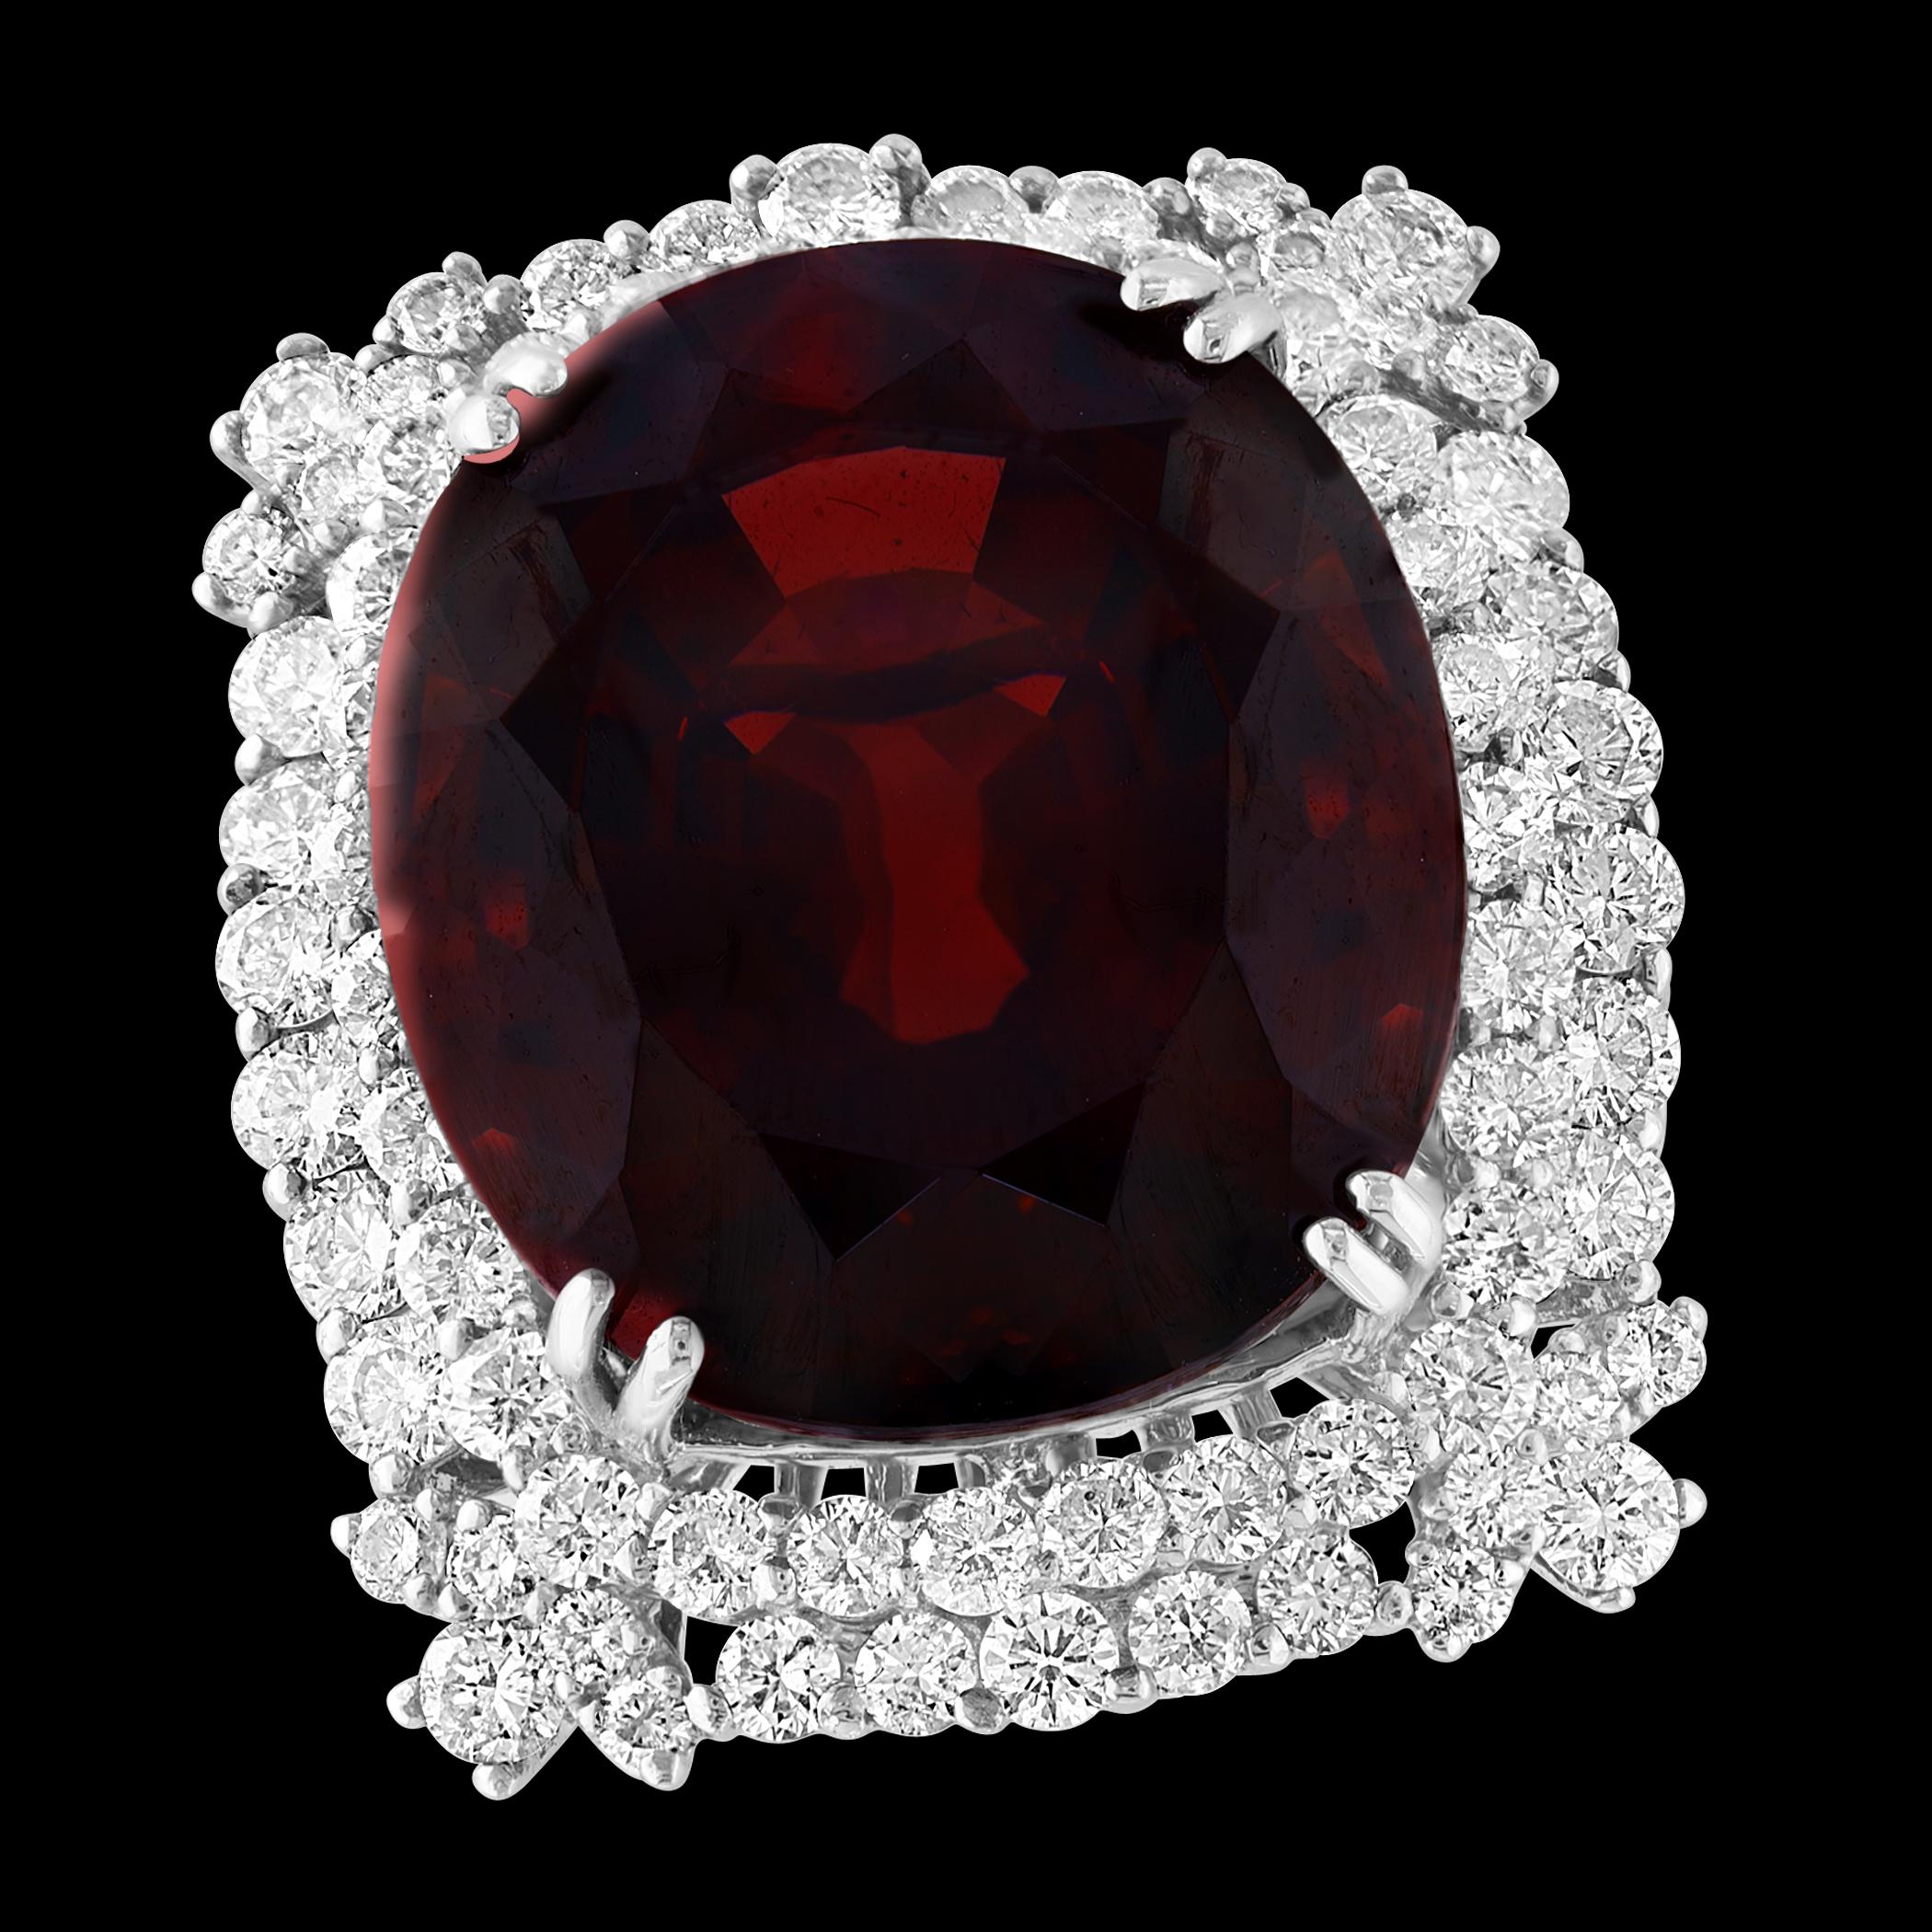 25 Carat Cushion Shape Rhodolite Garnet and 5.8 Carat Diamond Ring 18 Karat Gold In Excellent Condition For Sale In New York, NY